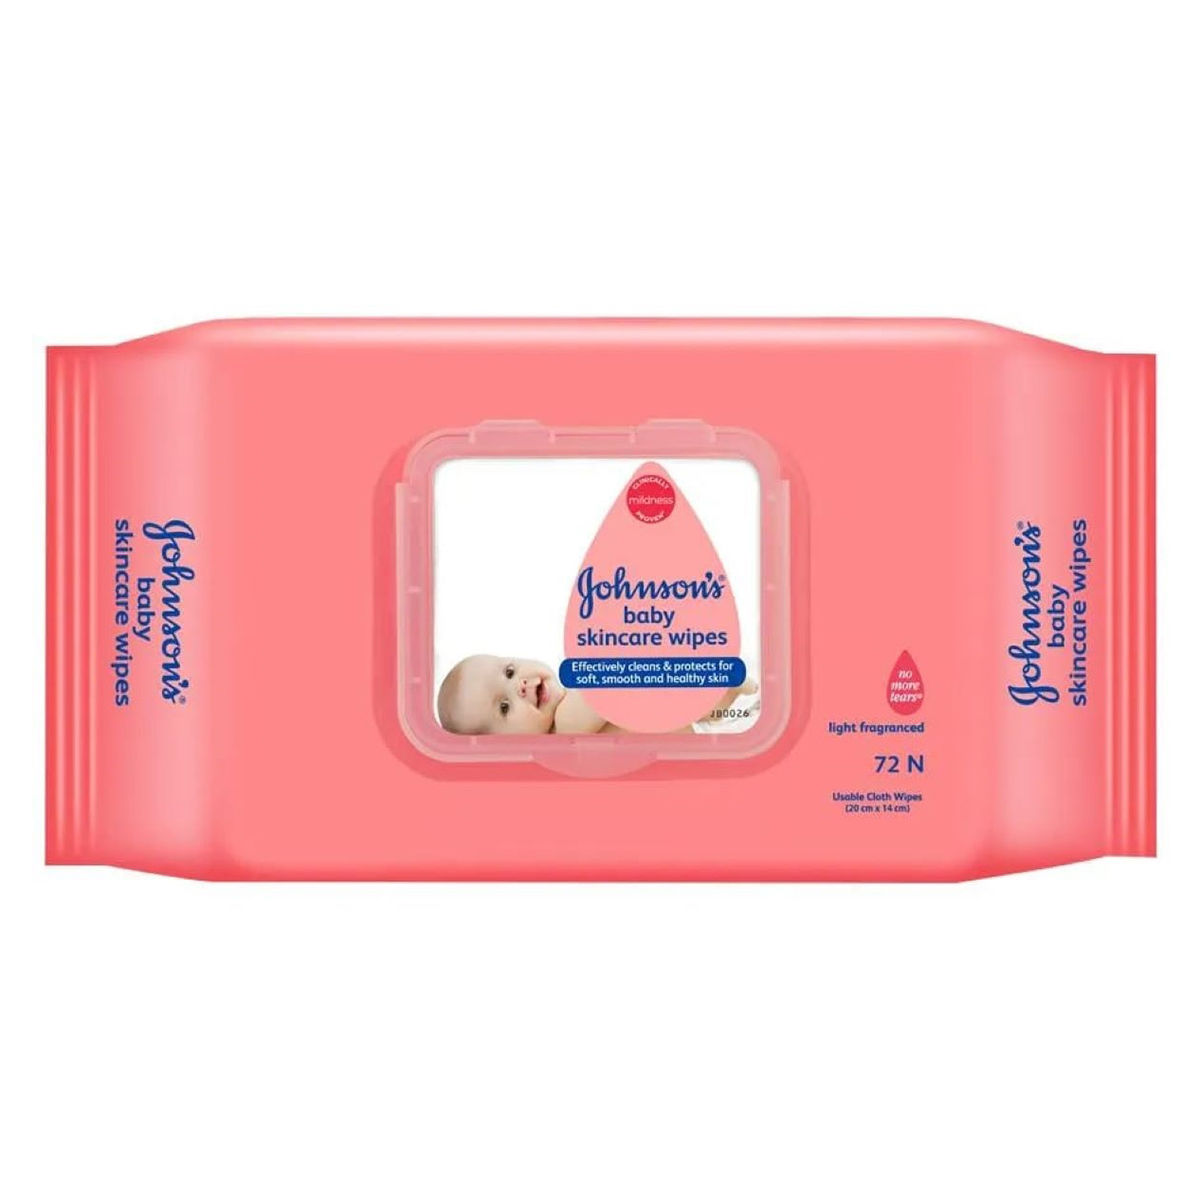 Buy Johnson's Baby Skincare Wipes, 72 Count Online